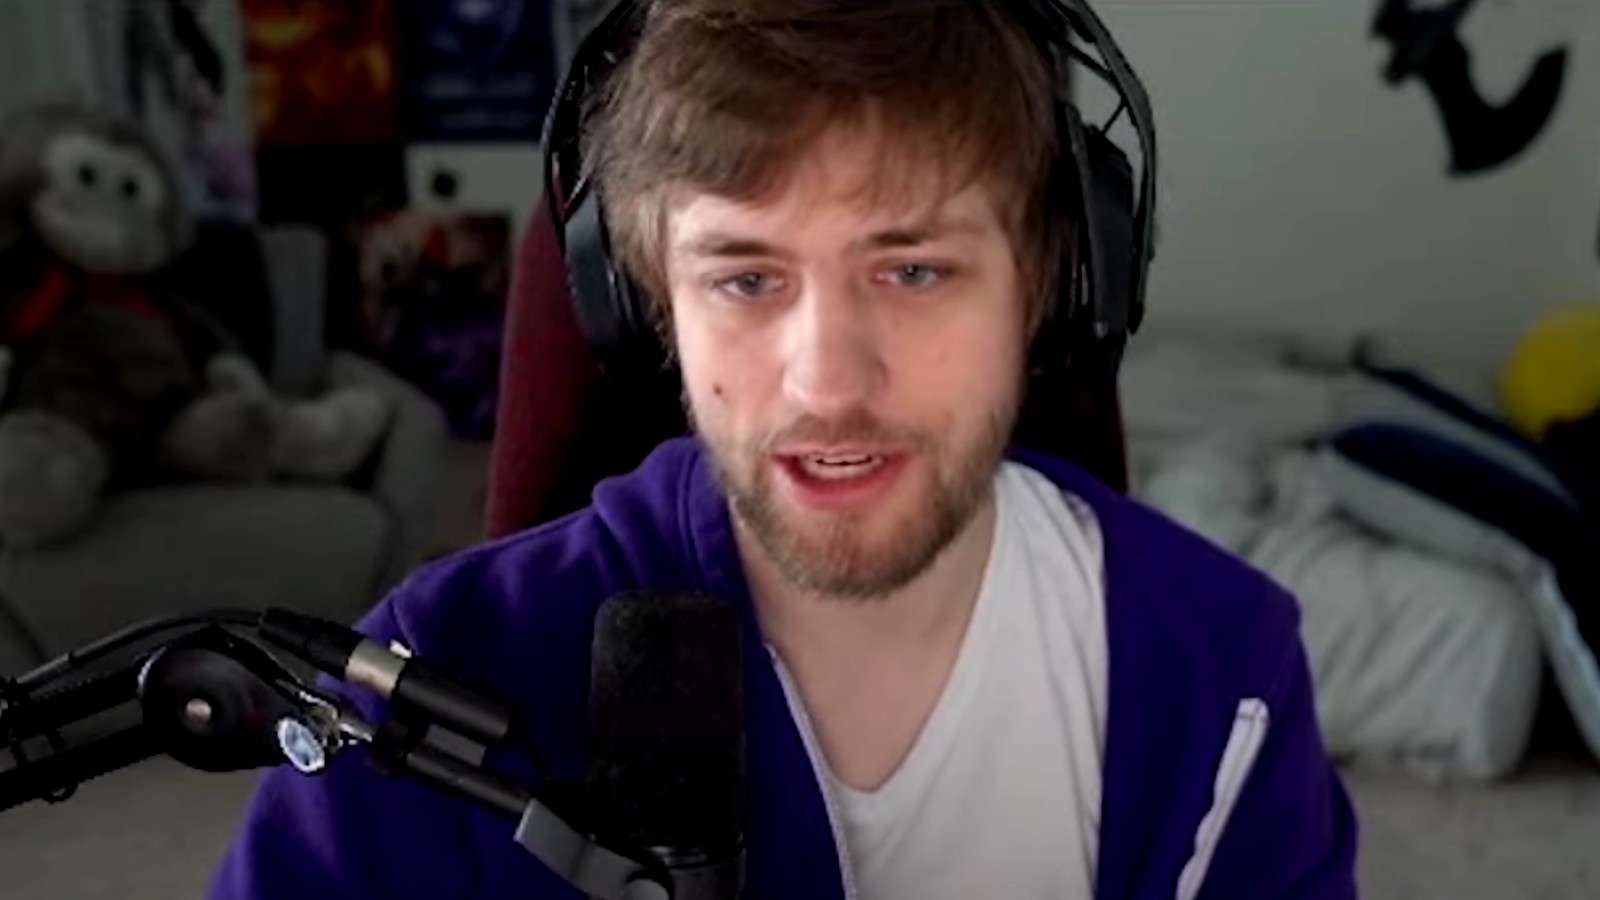 Sodapoppin in a YouTube video